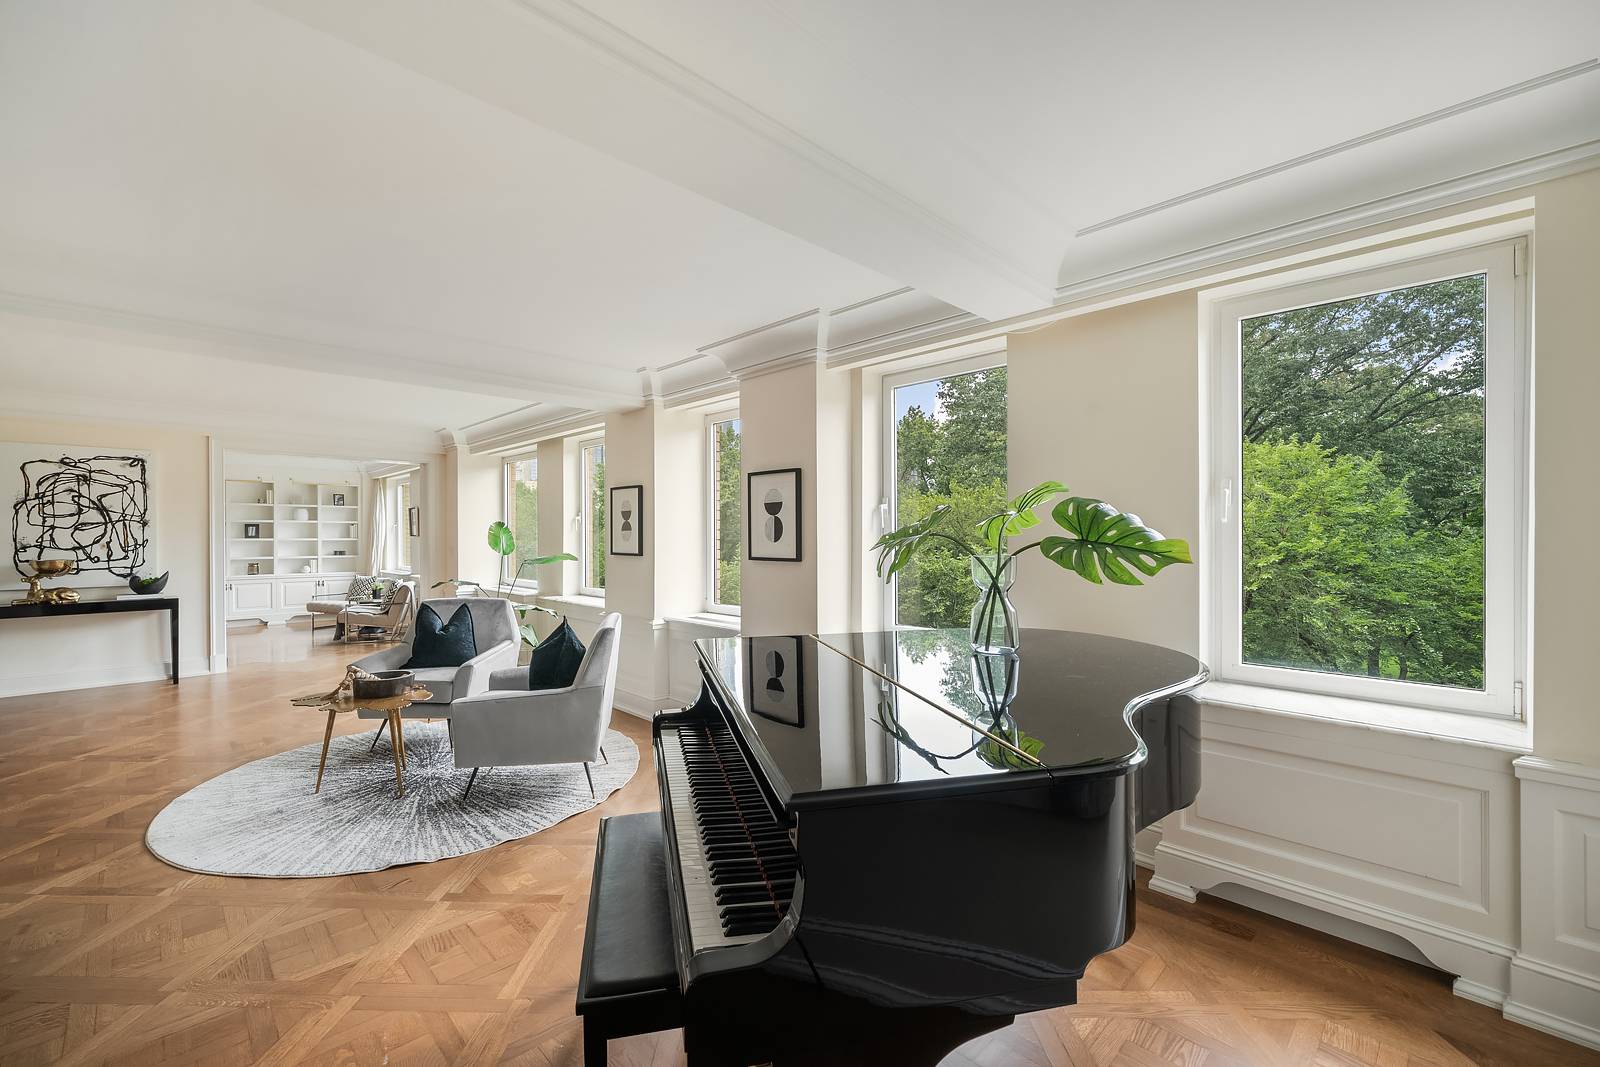 A one of a kind duplex co op boasting dramatic Central Park views, this 4 bedroom, 5 bathroom home is a portrait of traditional city luxury and comfort.